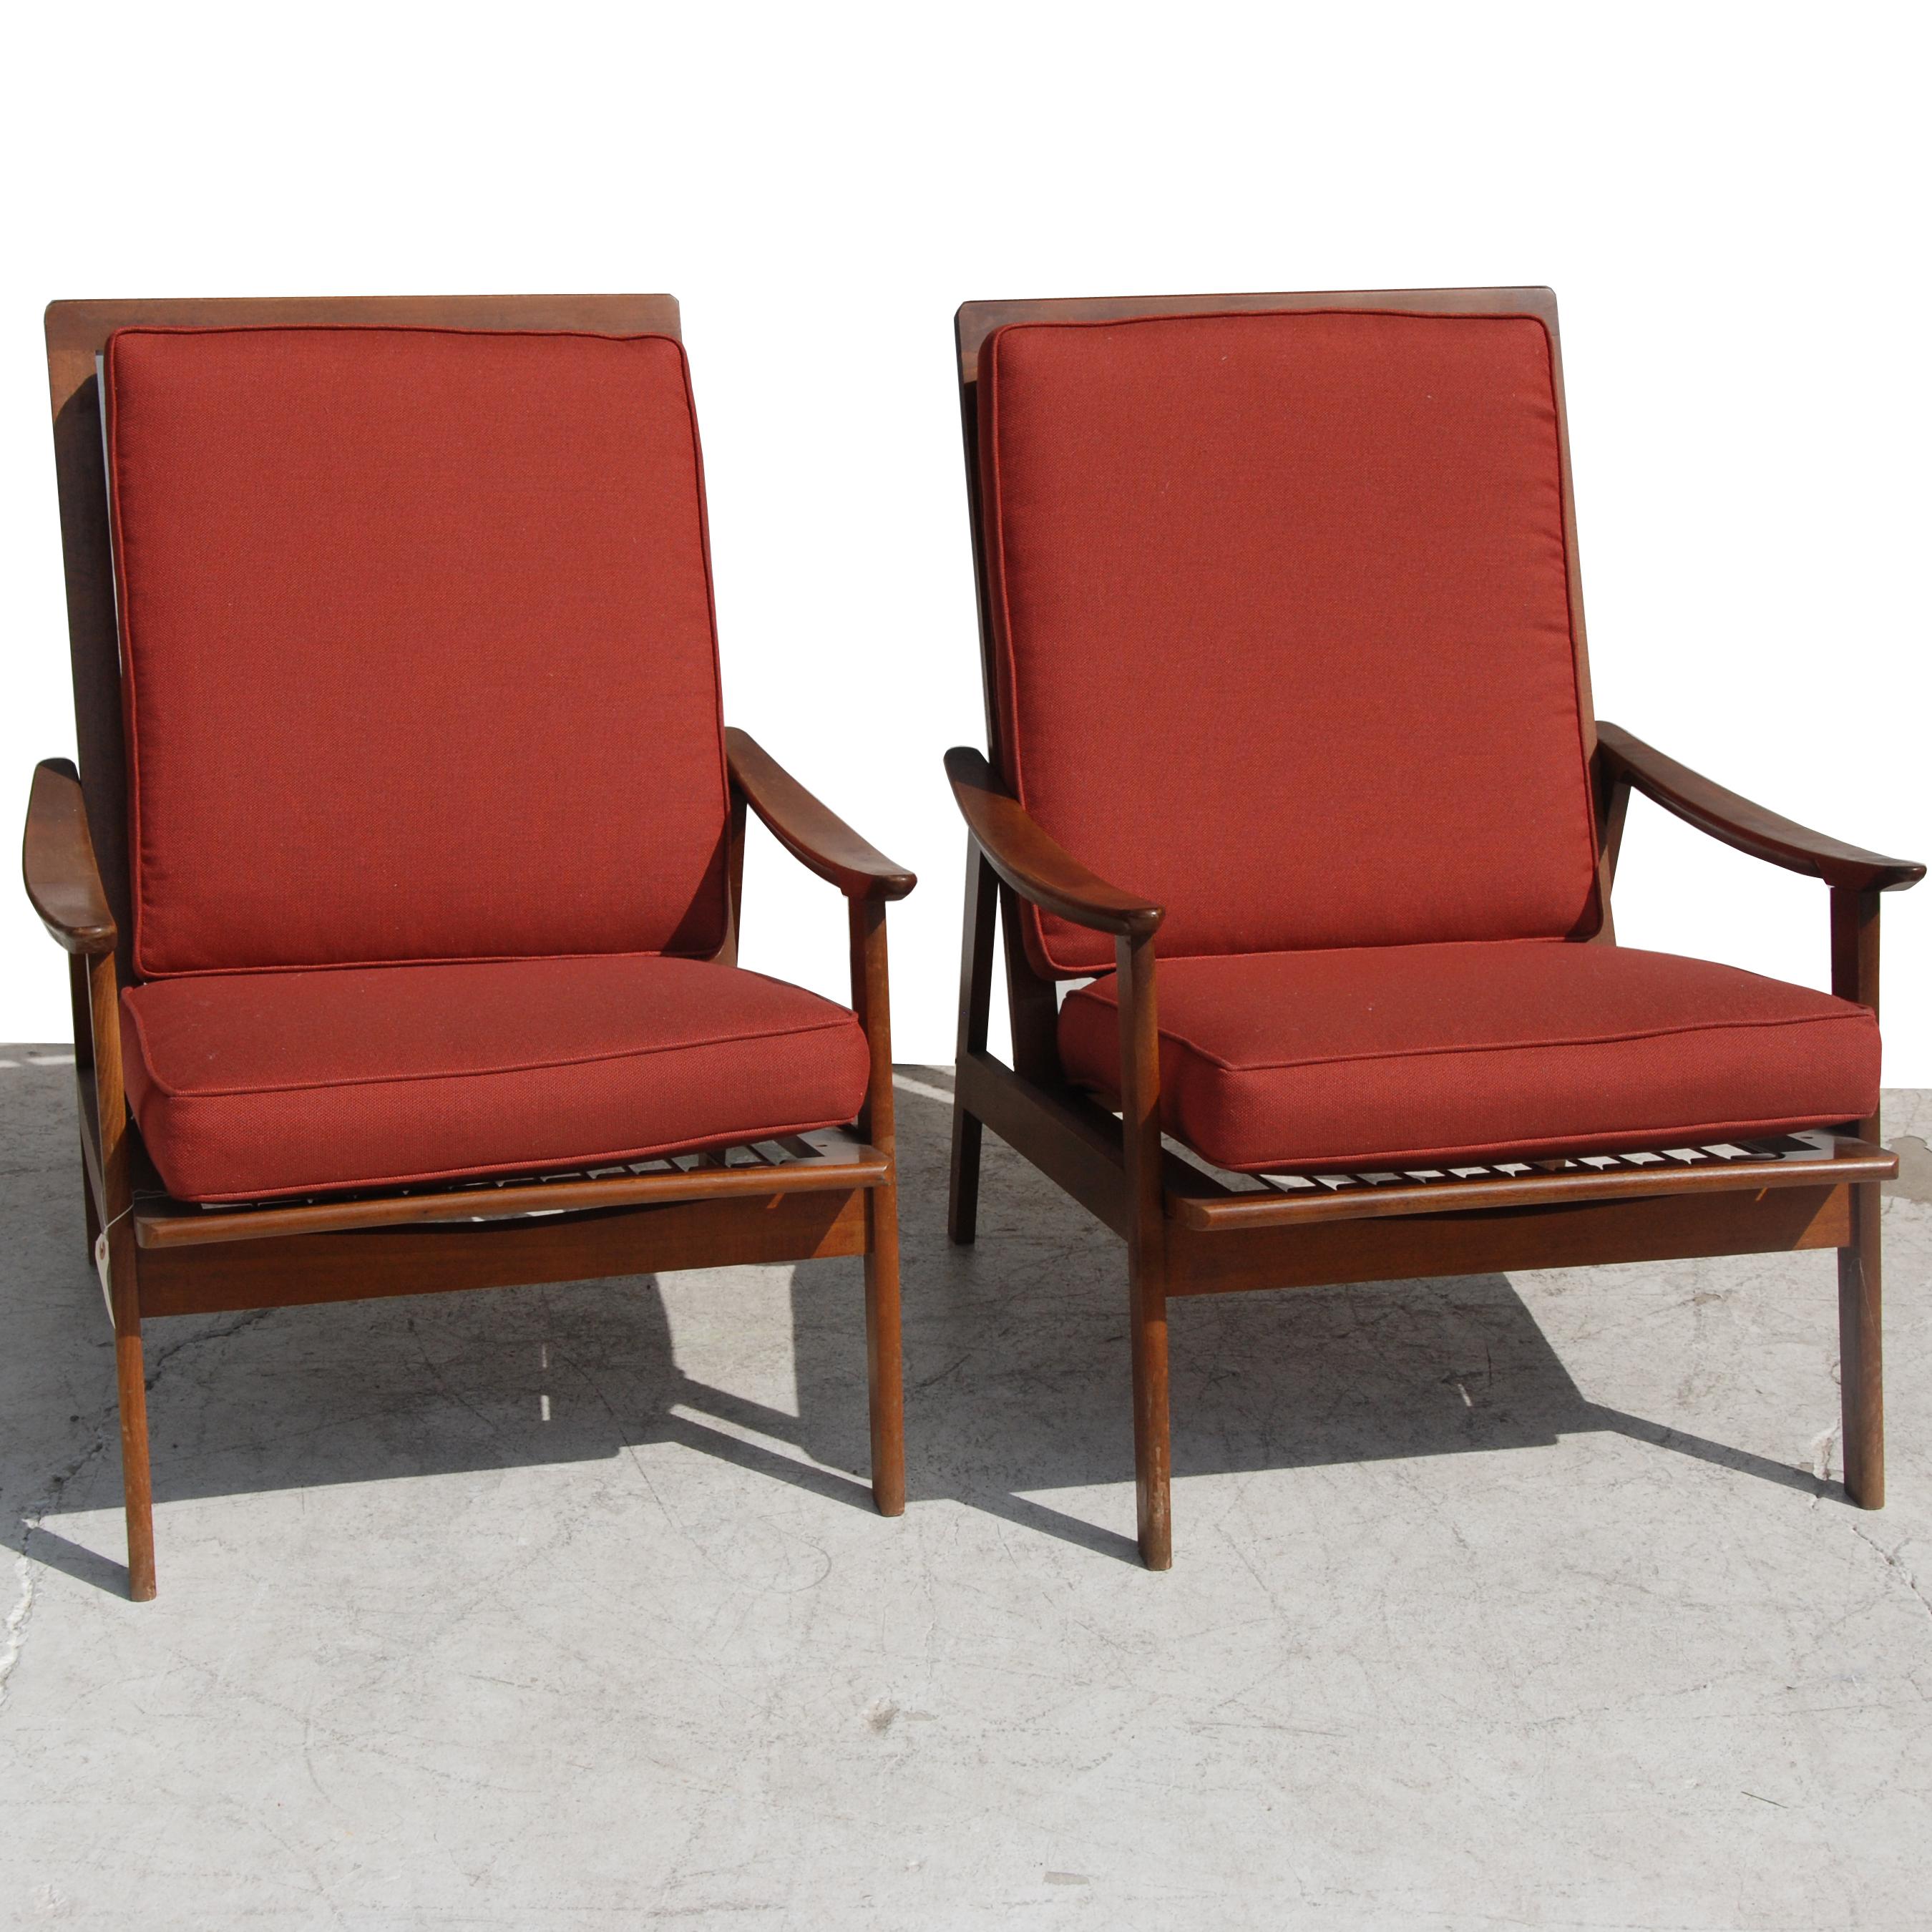 Mid-Century Modern Vintage Midcentury Pair of Danish Lounge Chairs For Sale